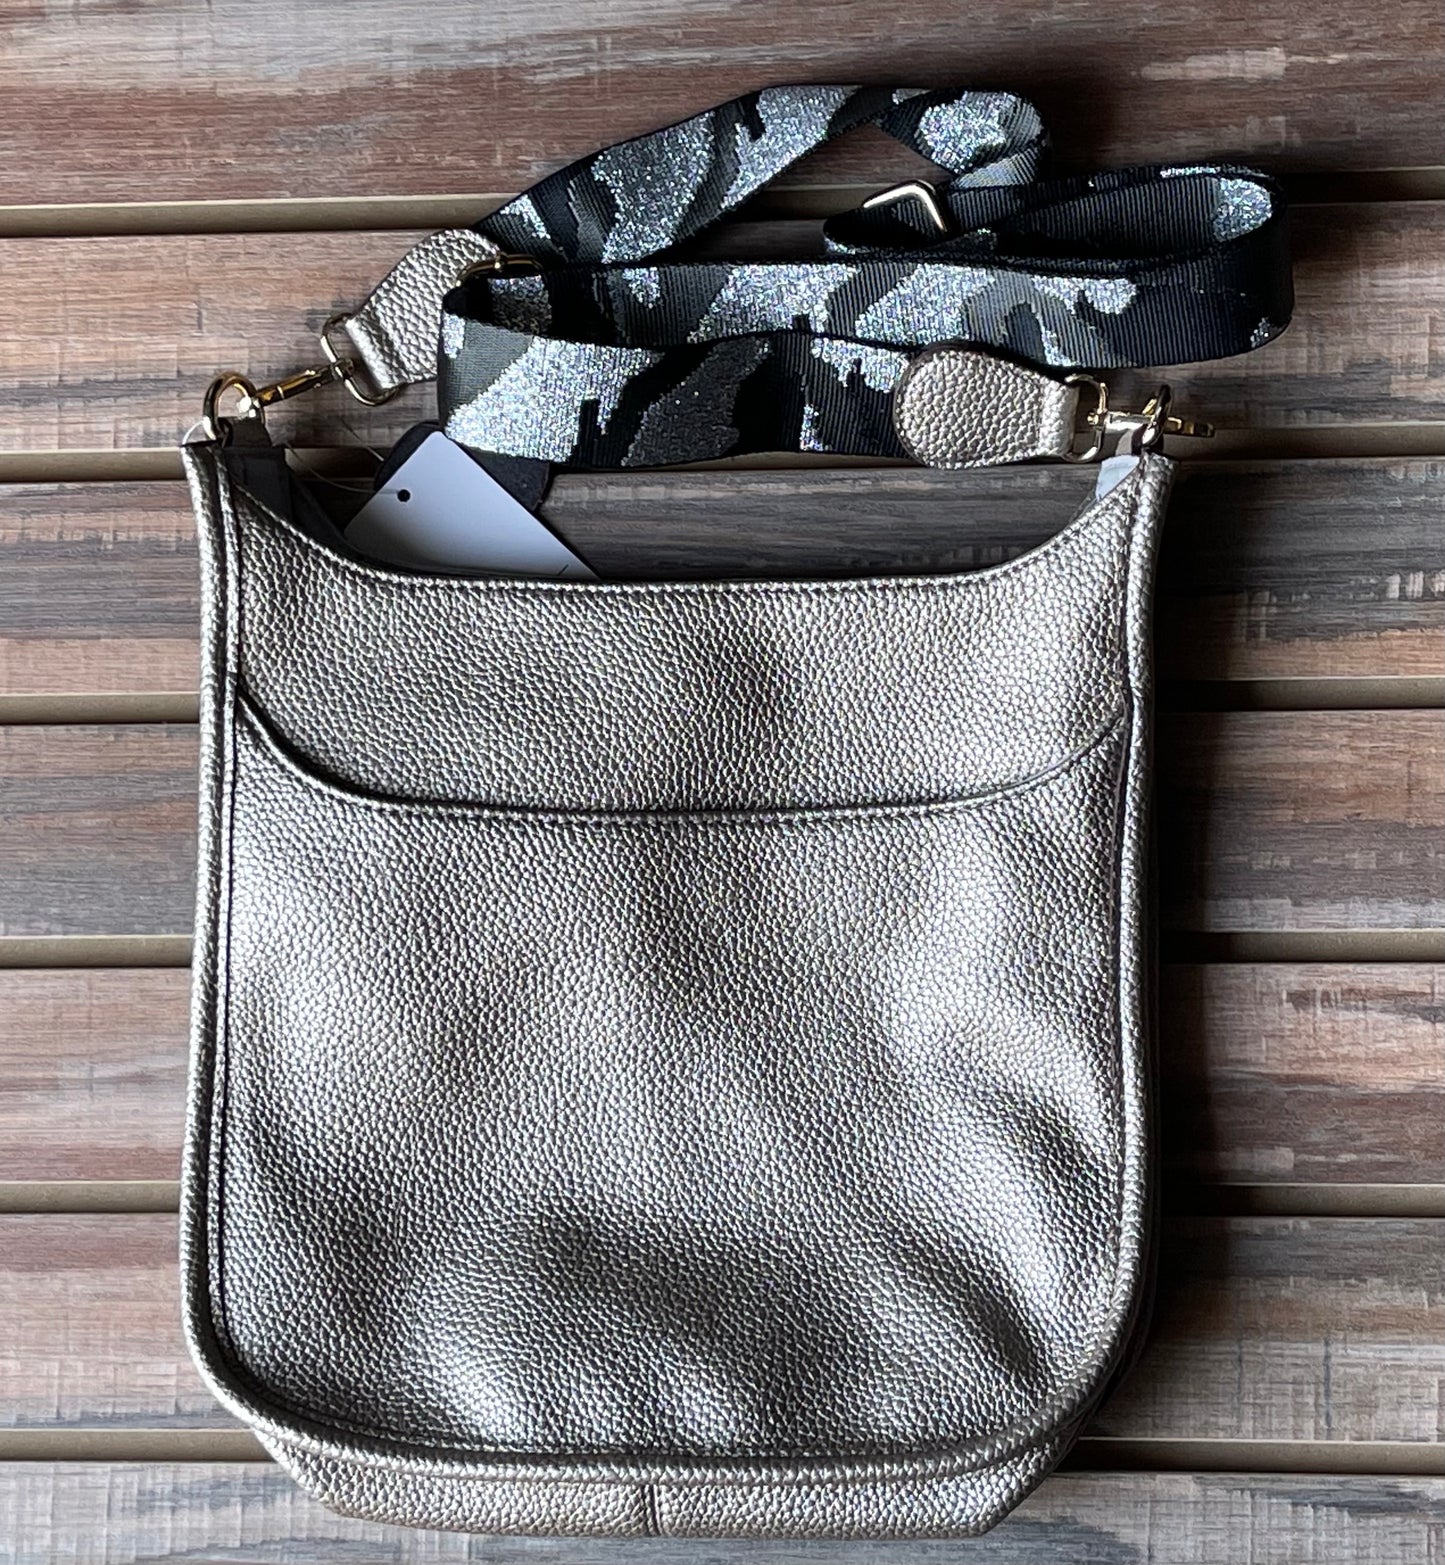 The Shannon  All Day  Messenger Bag